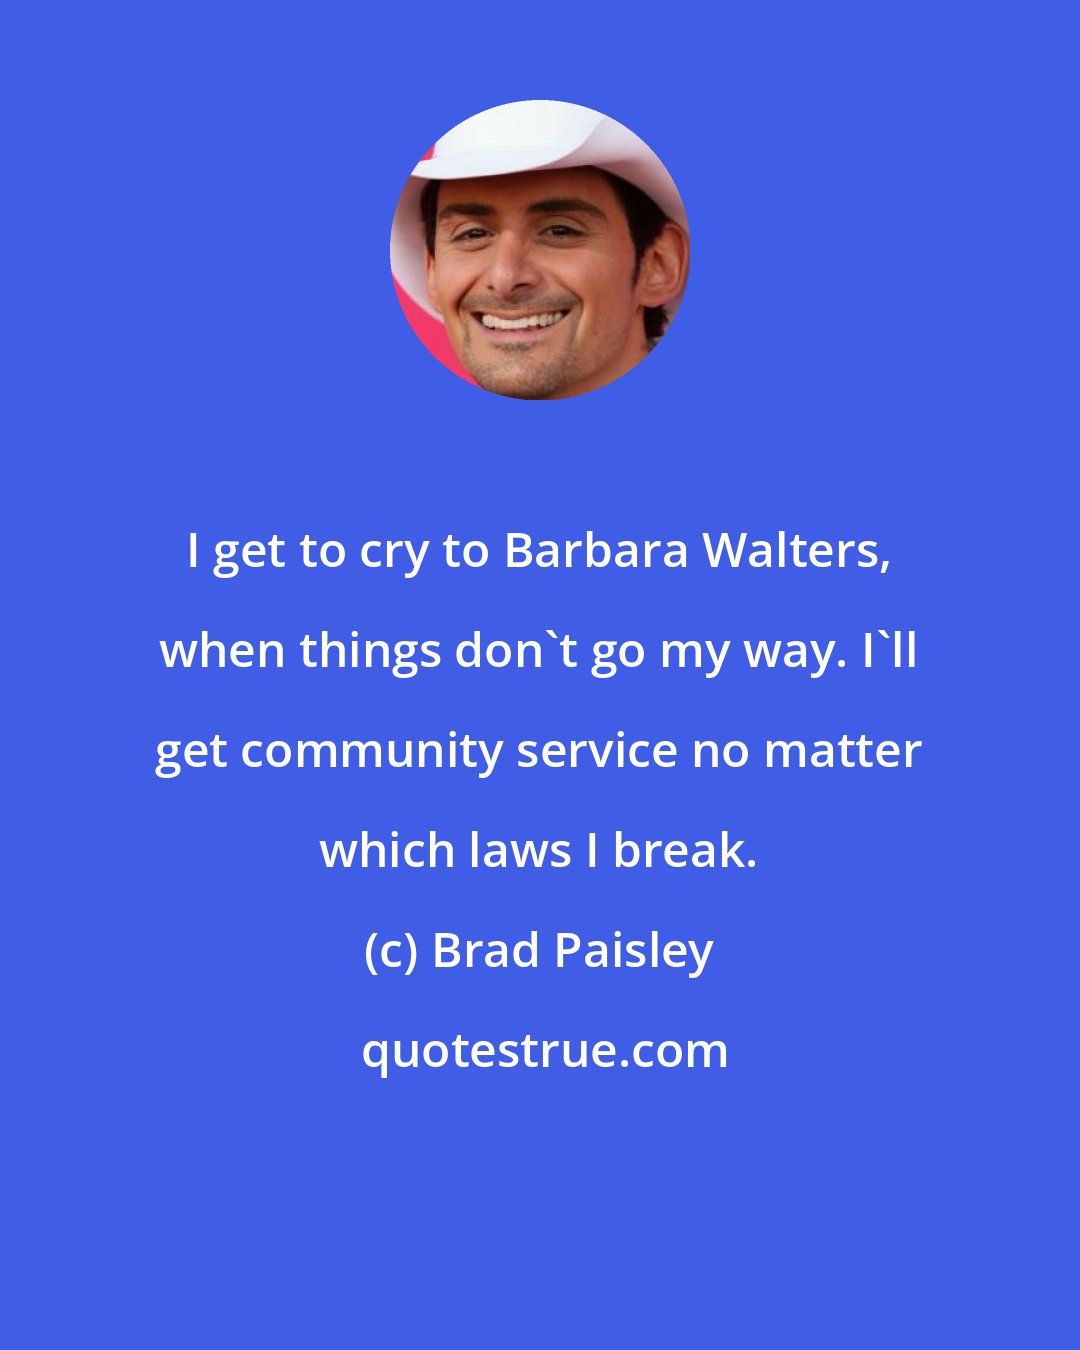 Brad Paisley: I get to cry to Barbara Walters, when things don't go my way. I'll get community service no matter which laws I break.